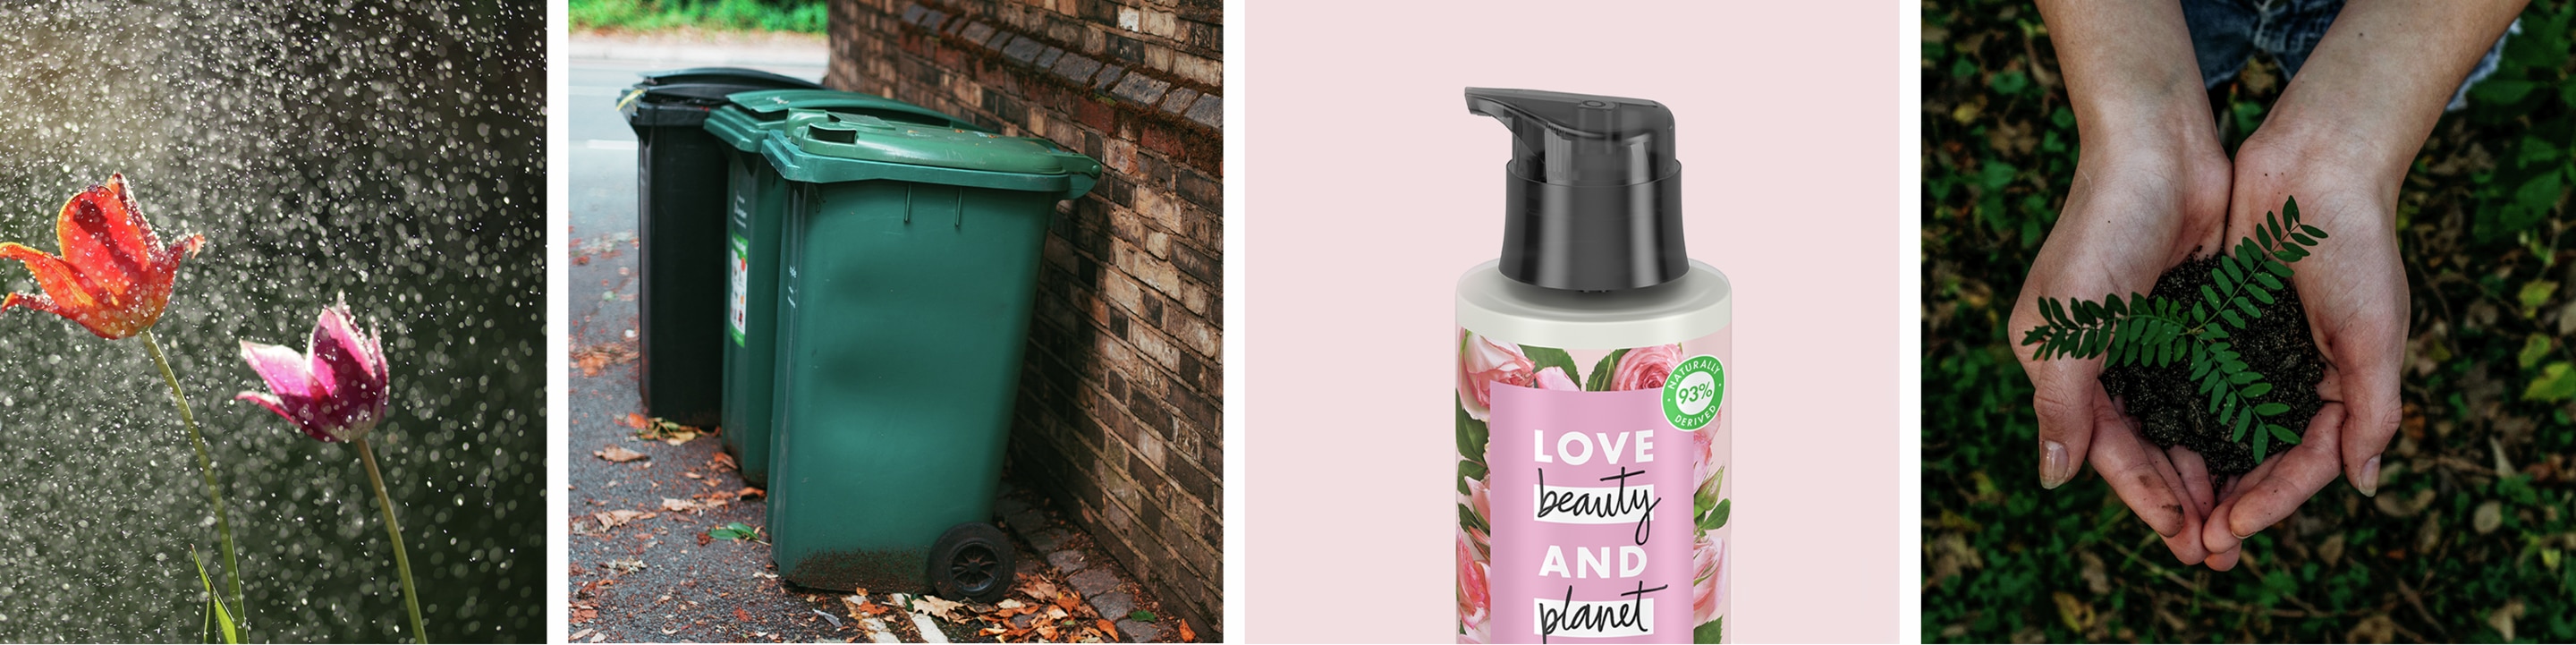 Love Beauty and Planet New Recyclable Single Plastic Bottle Pump